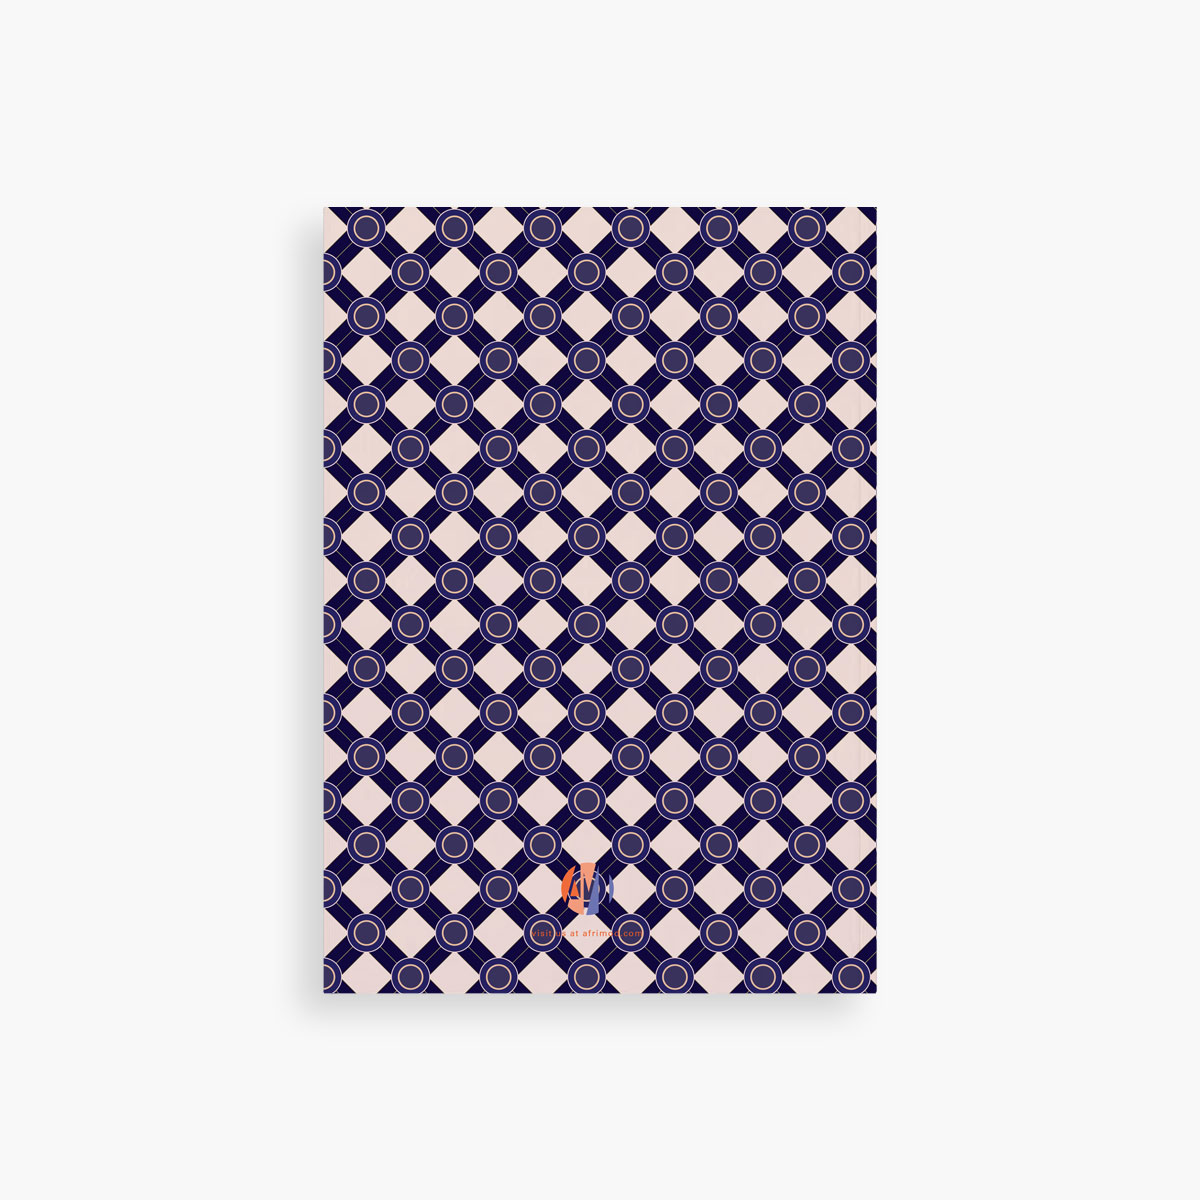 Purple & Dusty Pink Notebook with Monogram – woman in profile